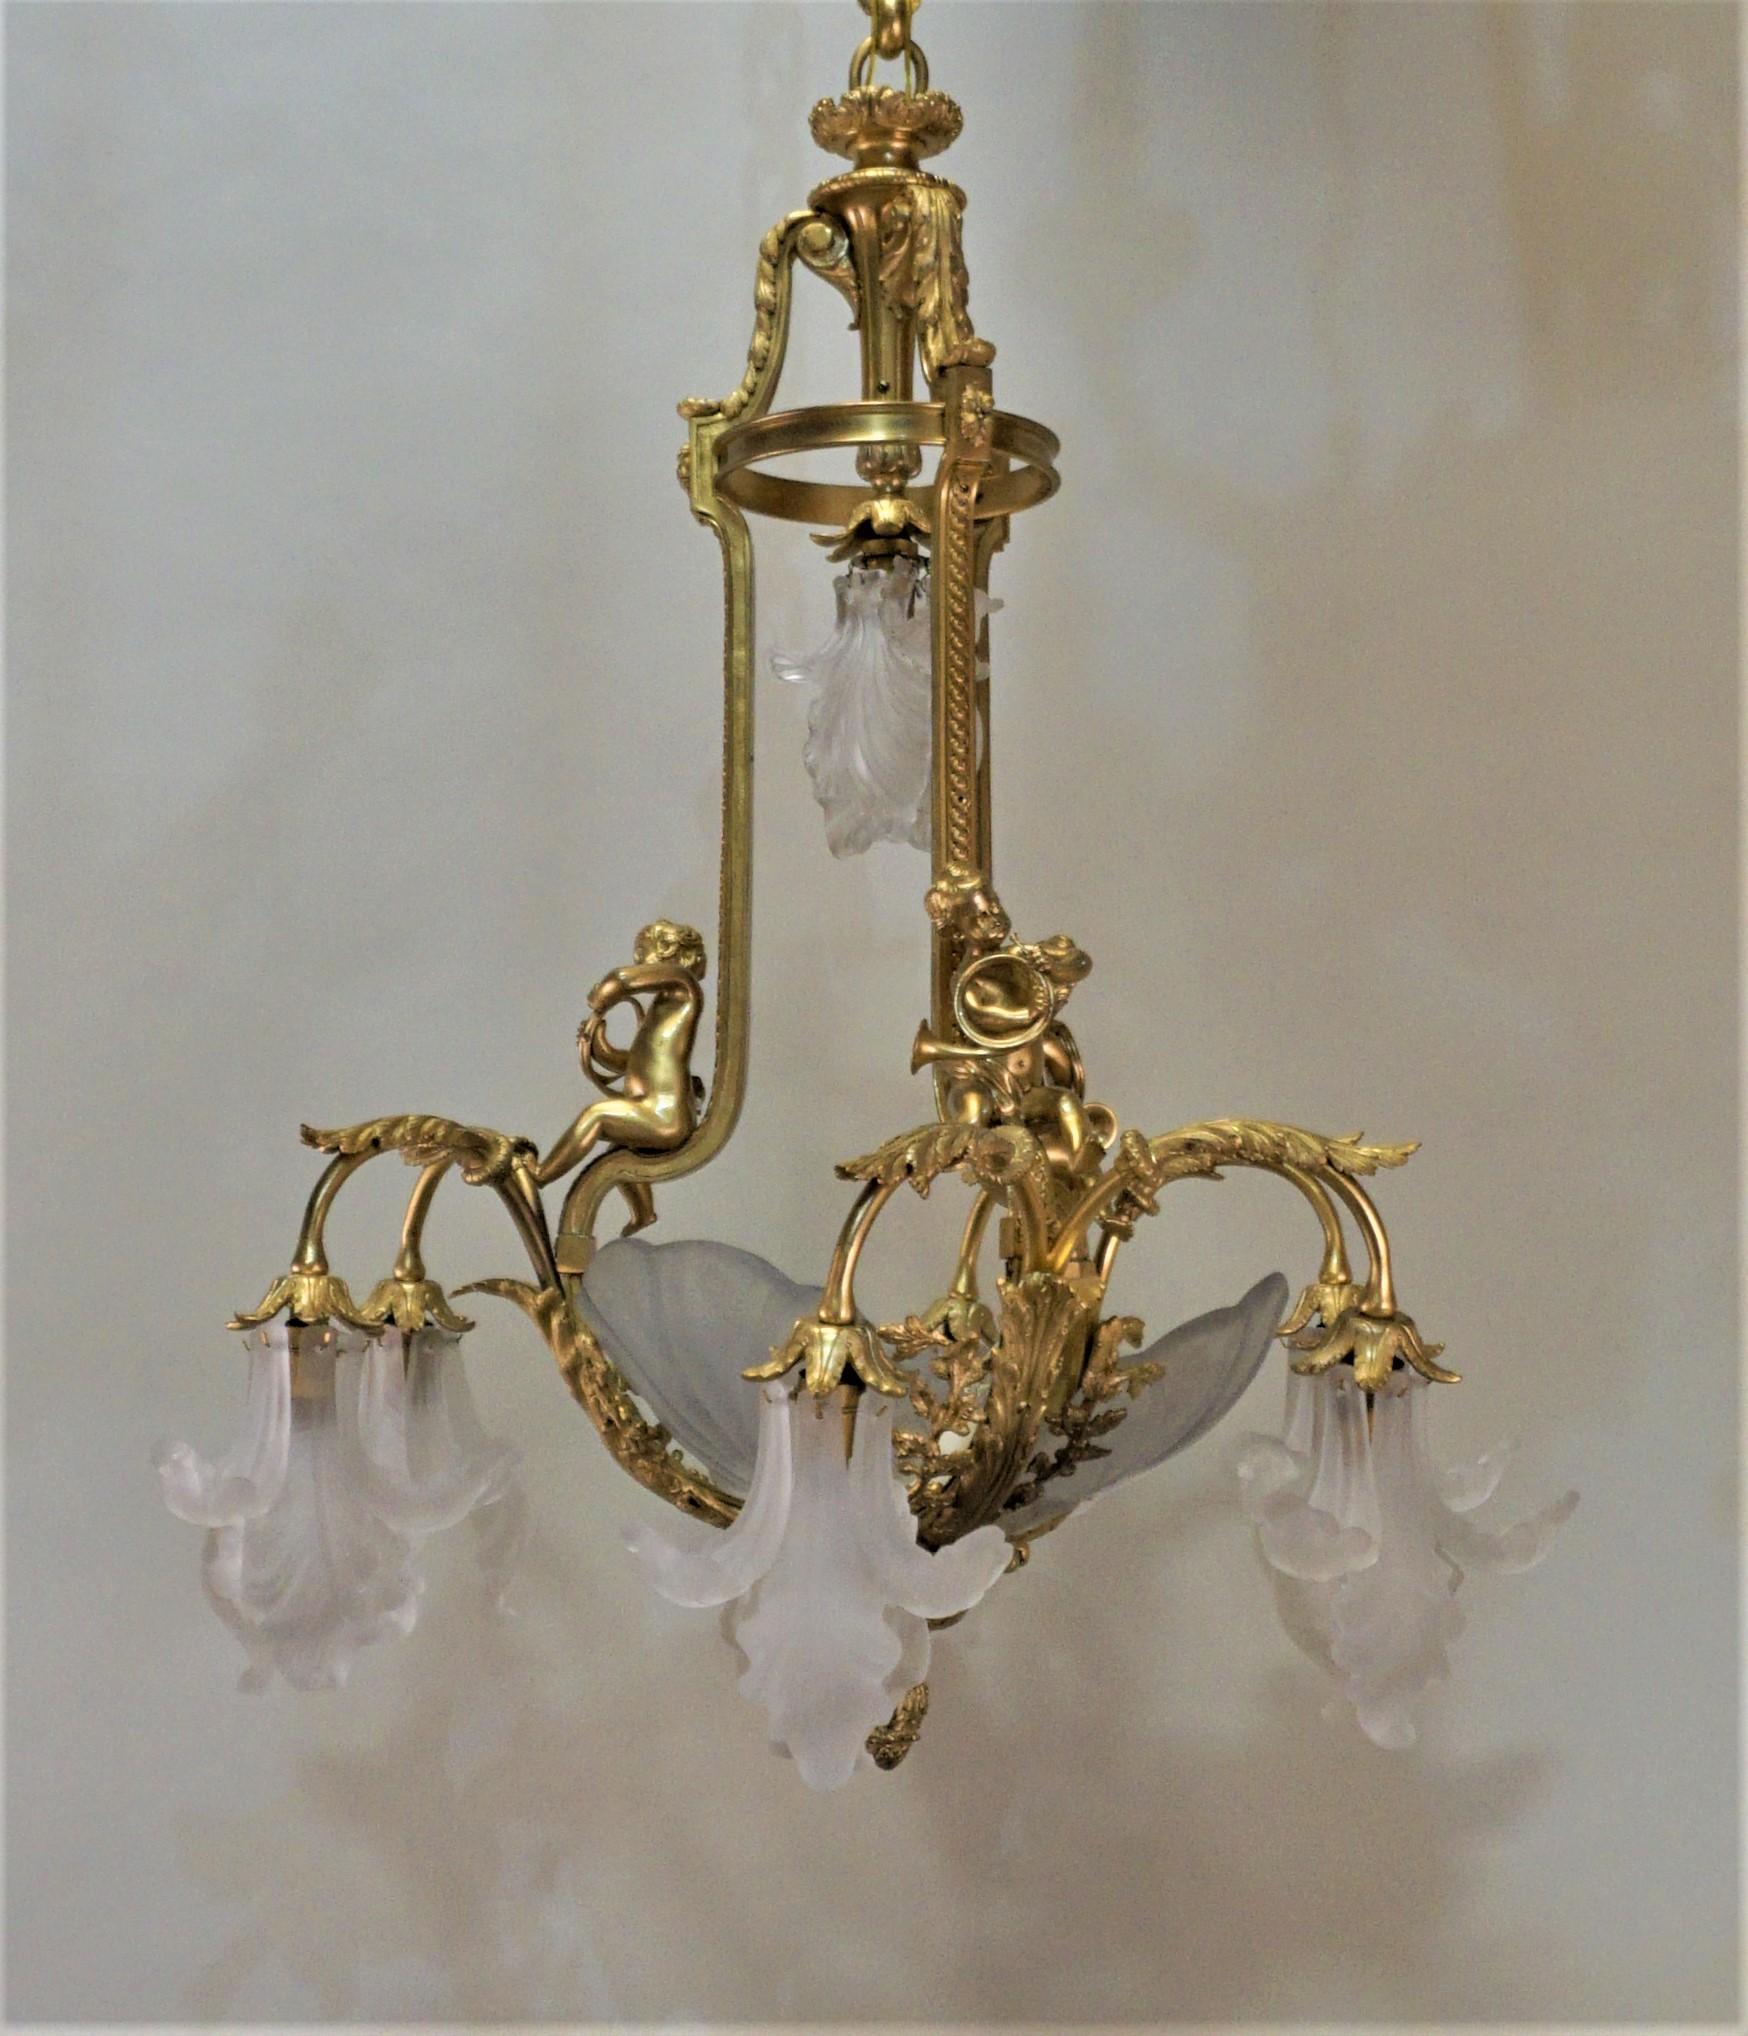 Important French Gilt Bronze Chandelier, Early 20th Century by E. Mottheau 8